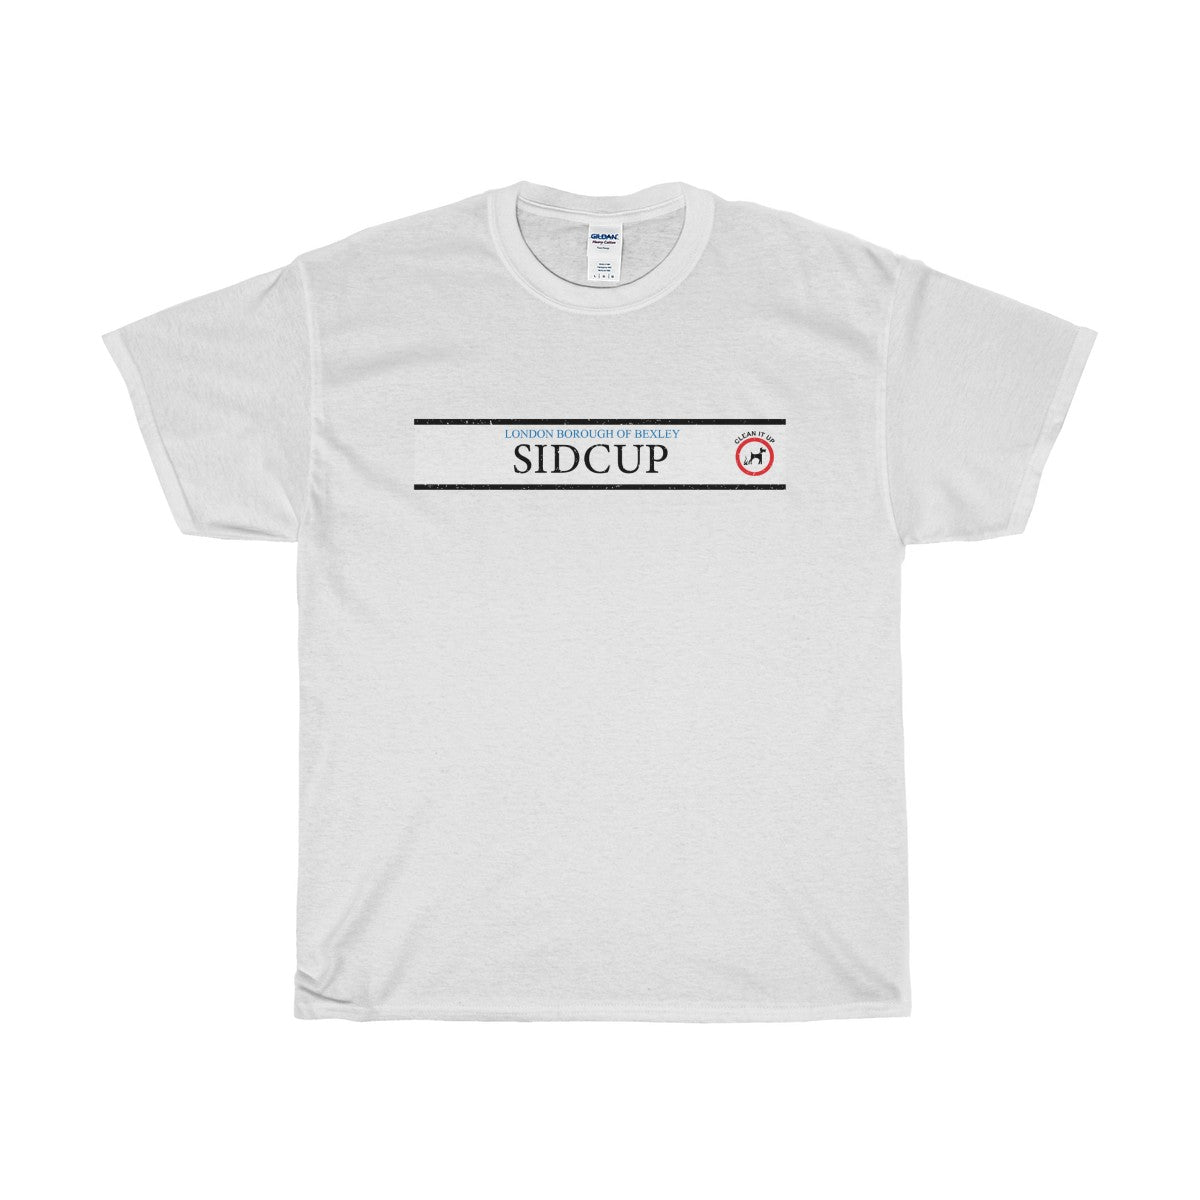 Sidcup Road Sign T-Shirt